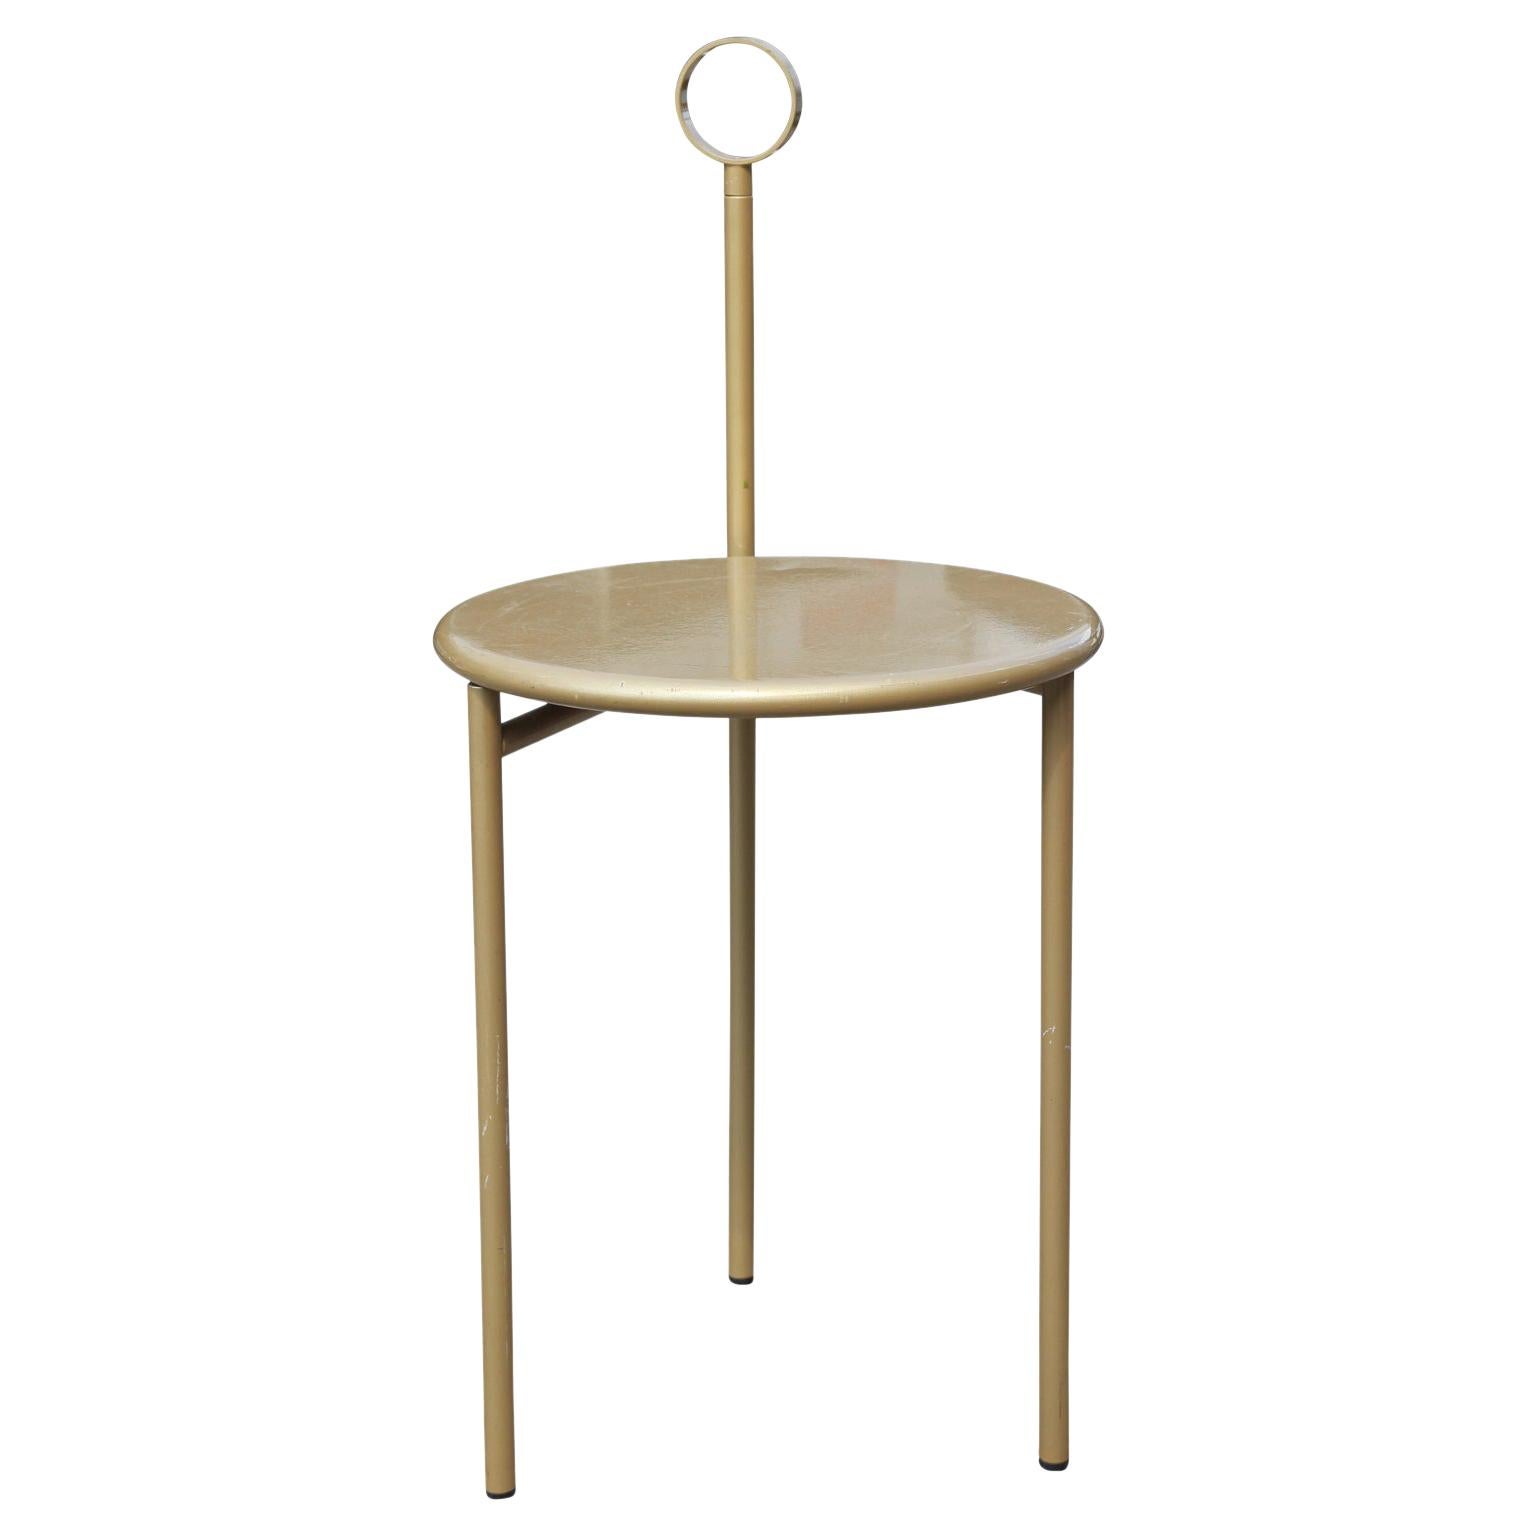 Philippe Starck and Aleph Ubik for Driade 3 Leg Stool/ Chair "Mickvill"